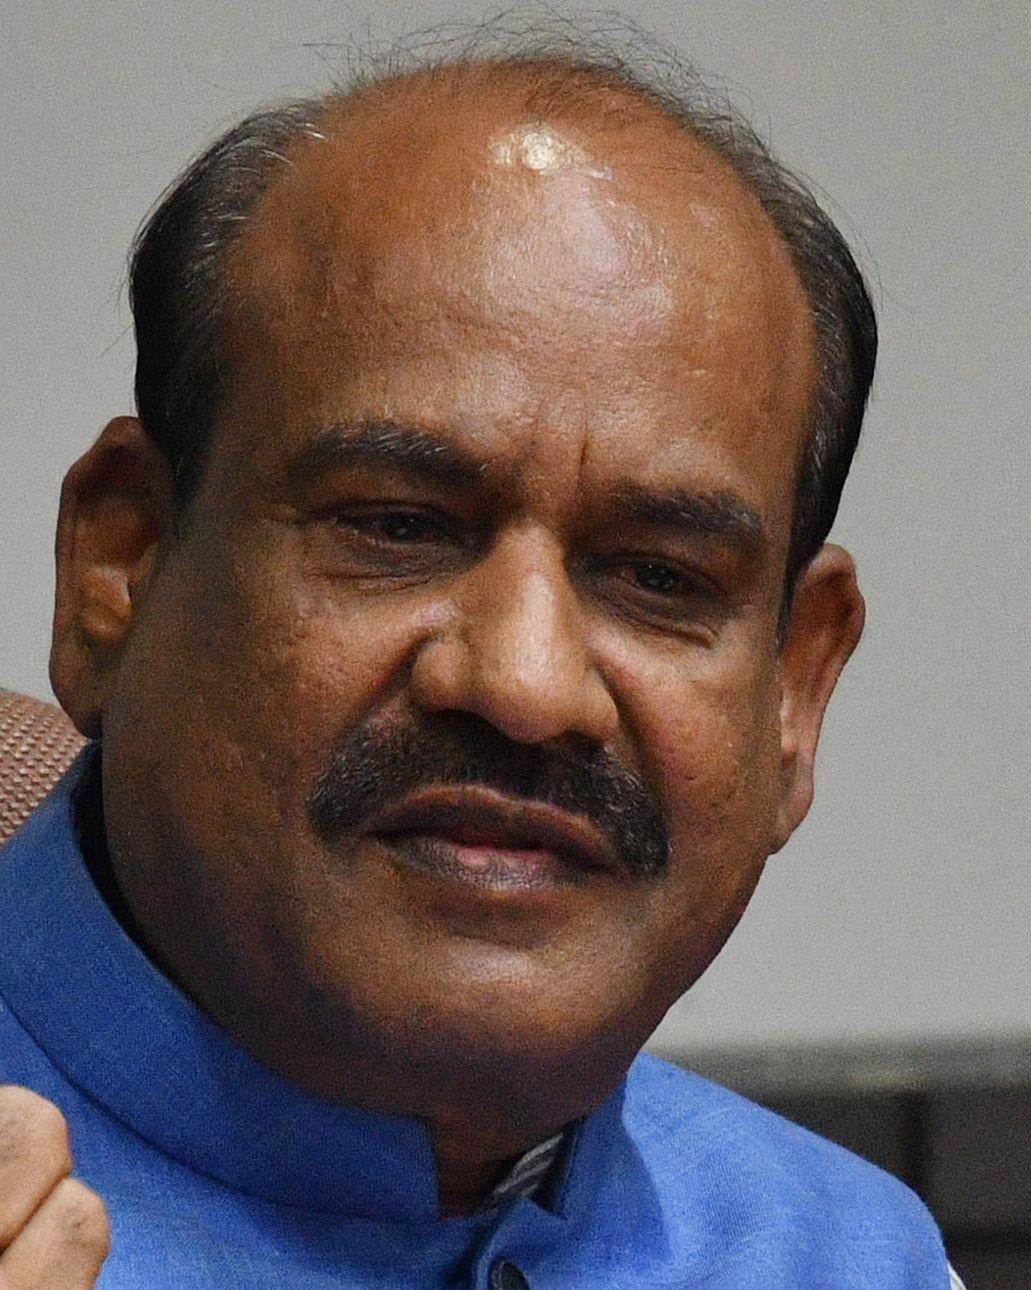 After Opposition outrage over 'unparliamentary words', Speaker Om Birla says no word banned, but display decorum